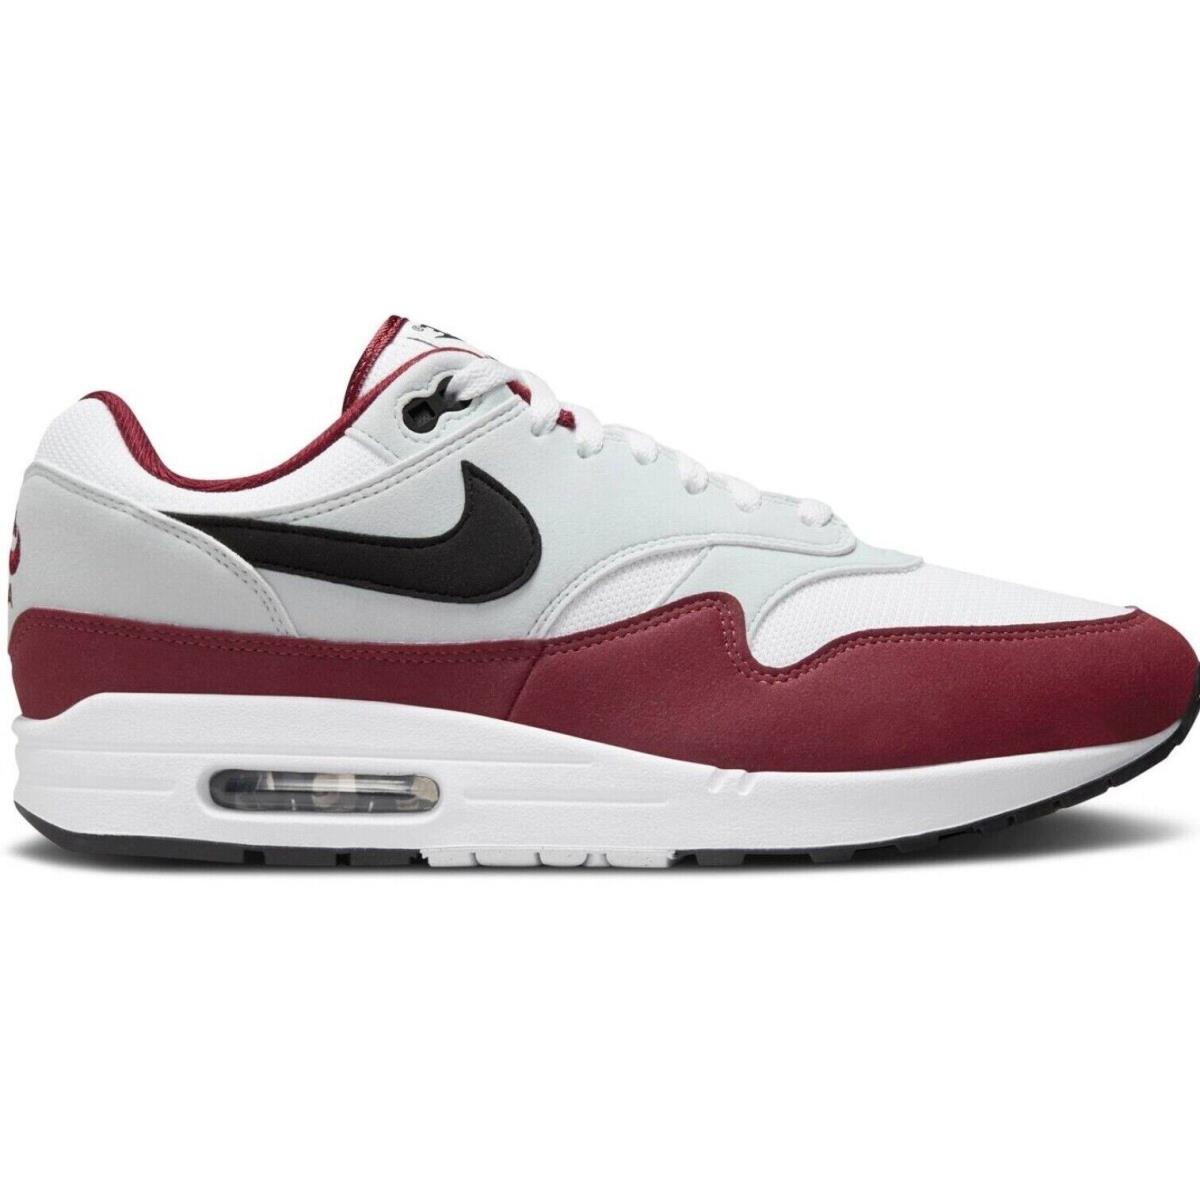 Nike Air Max 1 Men`s Casual Shoes All Colors US Sizes 7-14 White / Black / Dark Team Red / Pure Platinum